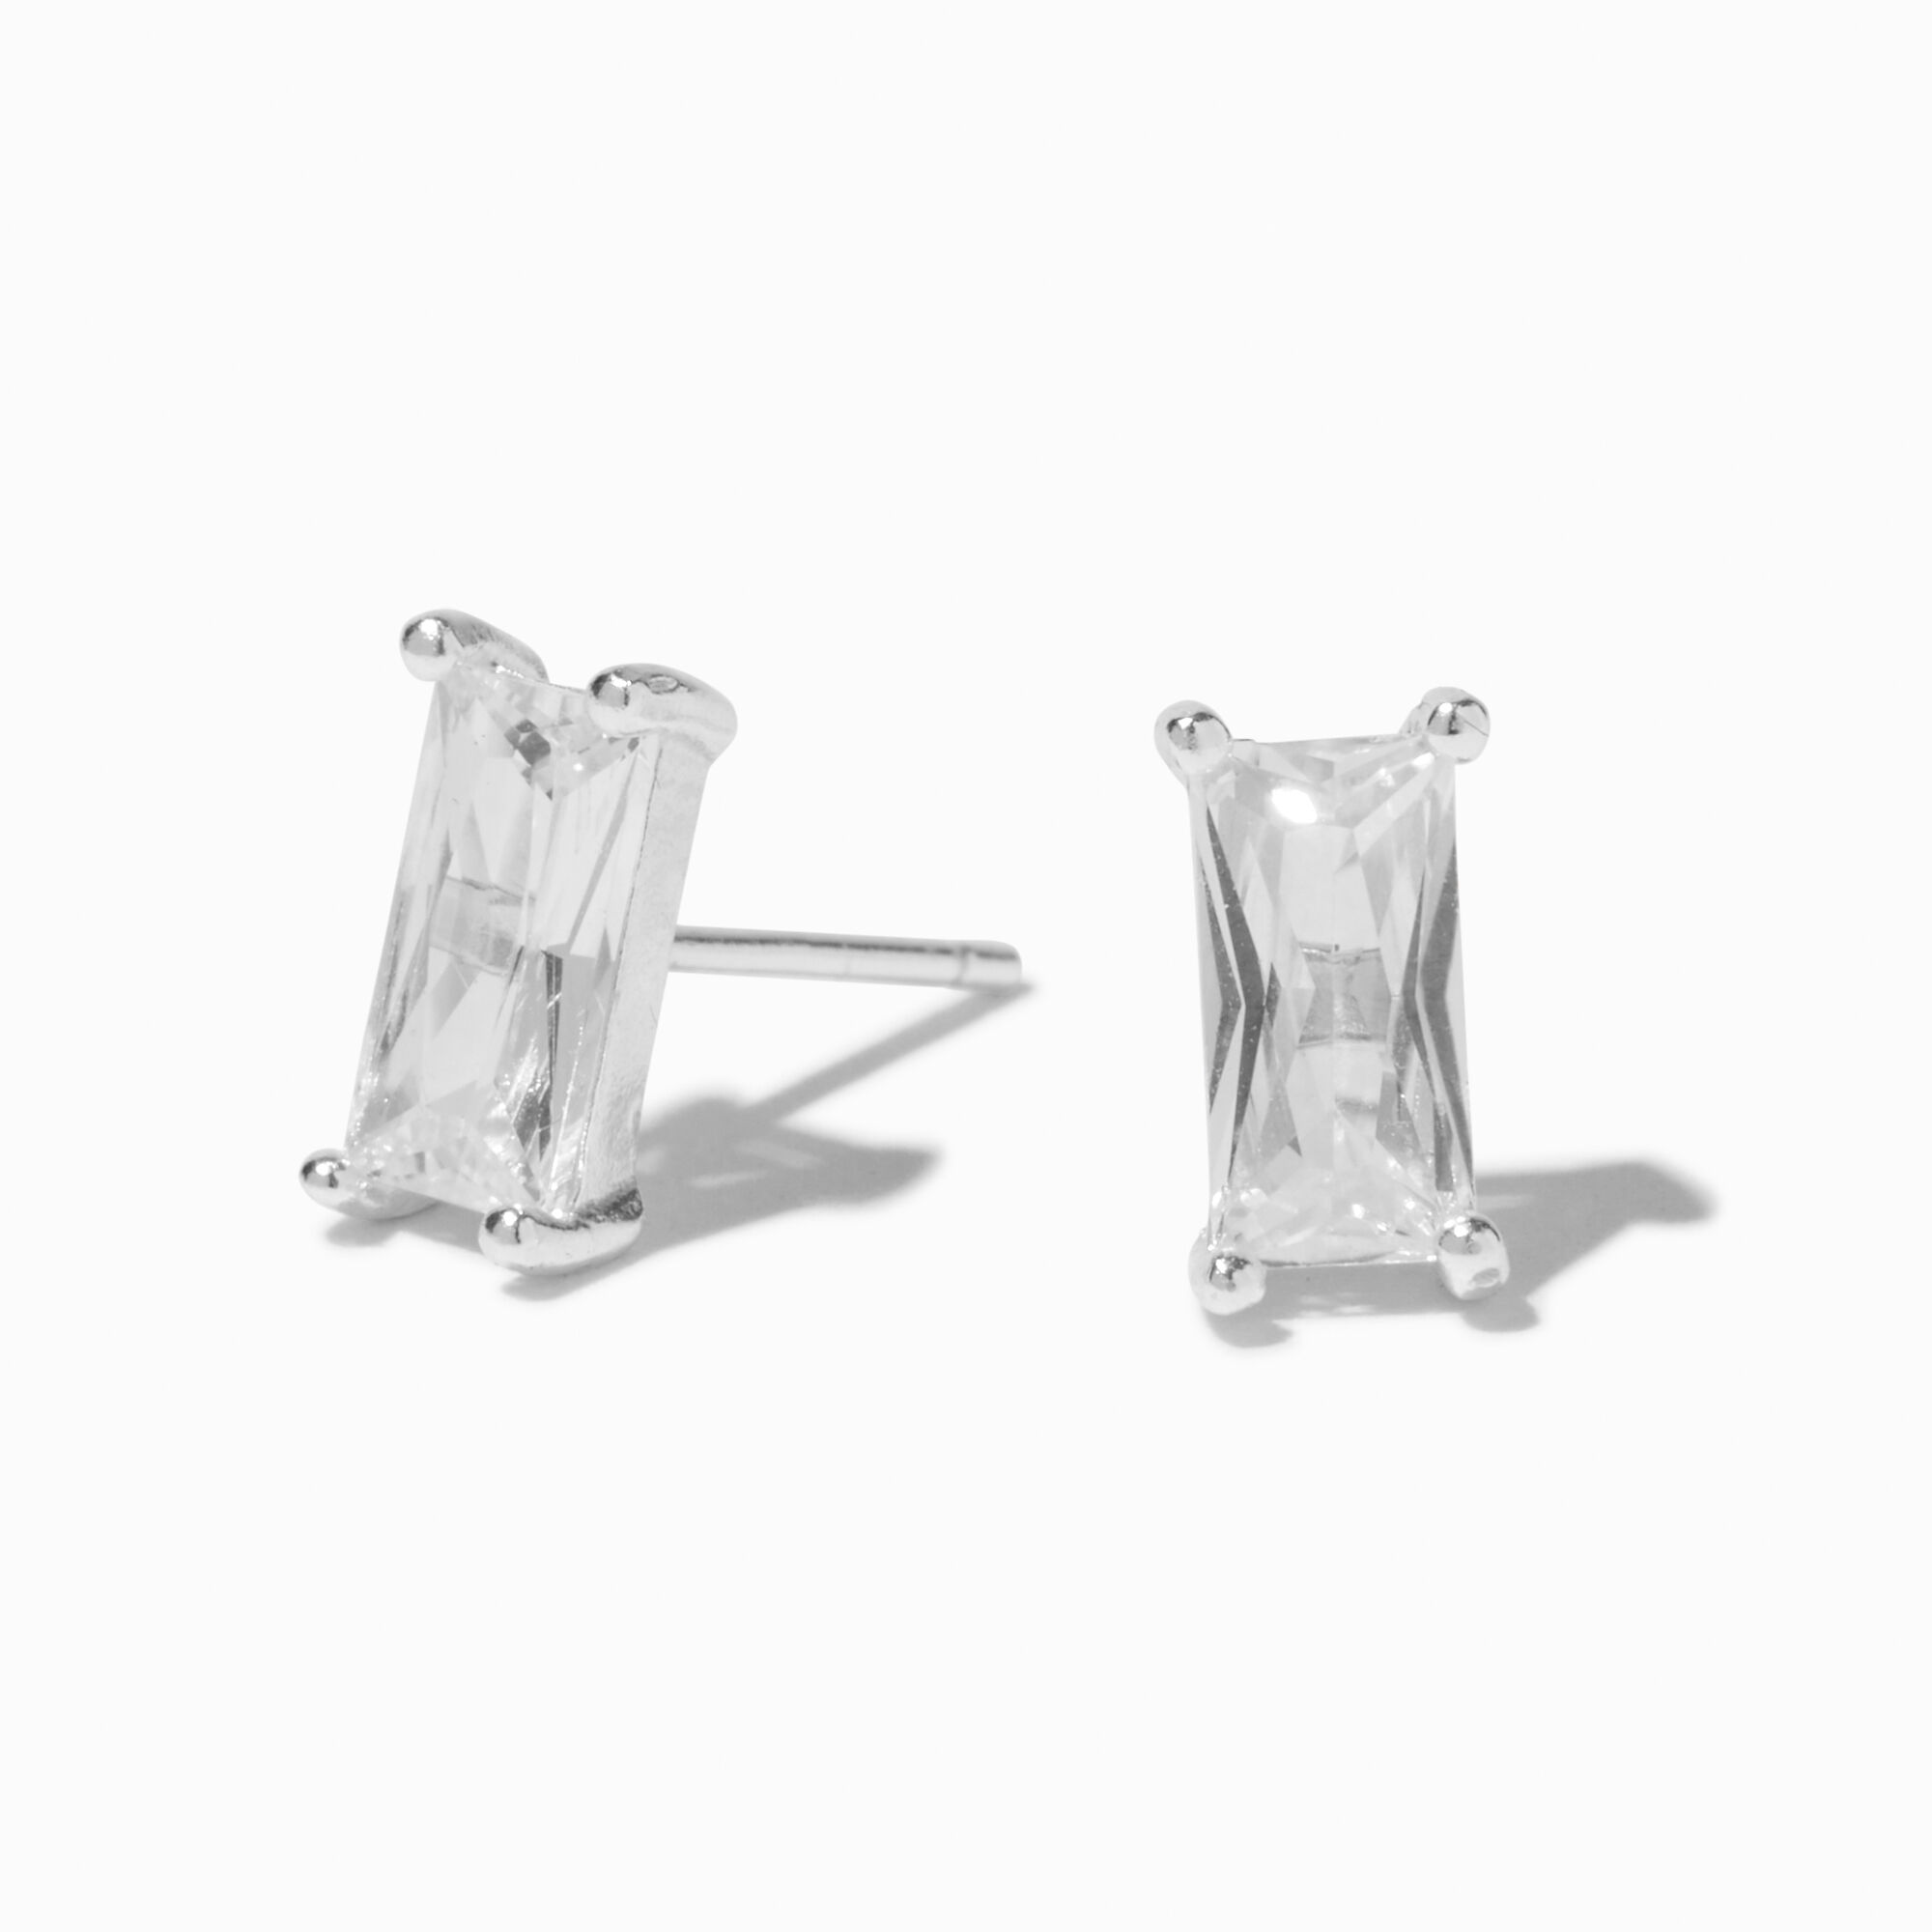 View Claires Cubic Zirconia 4X8MM Baguette Stud Earrings Silver information